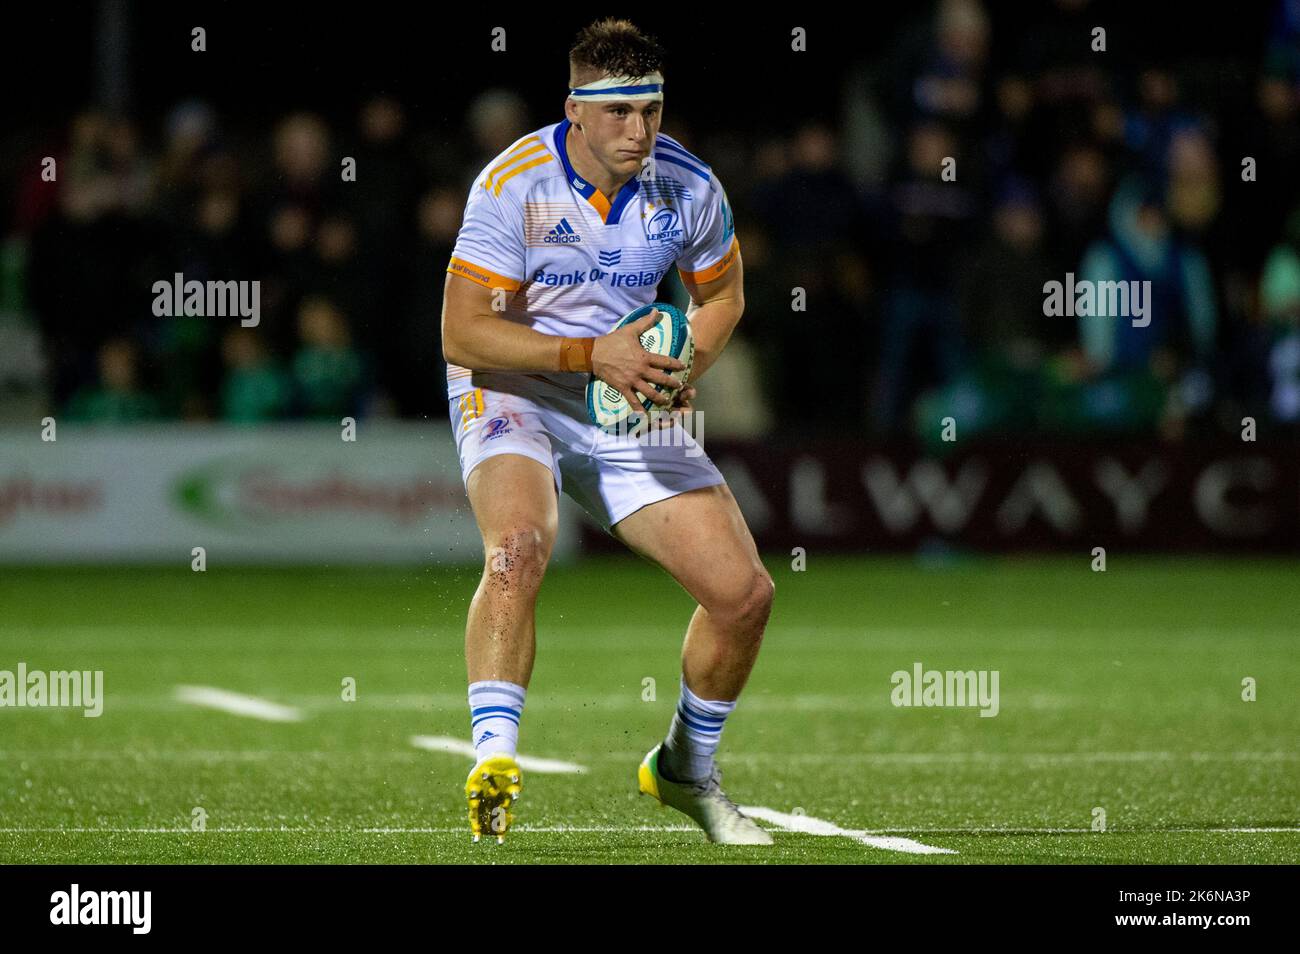 Dan Sheehan of Leinster with the ball during the United Rugby Championship Round 5 match between Connacht Rugby and Leinster Rugby at the Sportsground in Galway, Ireland on October 14, 2022 (Photo